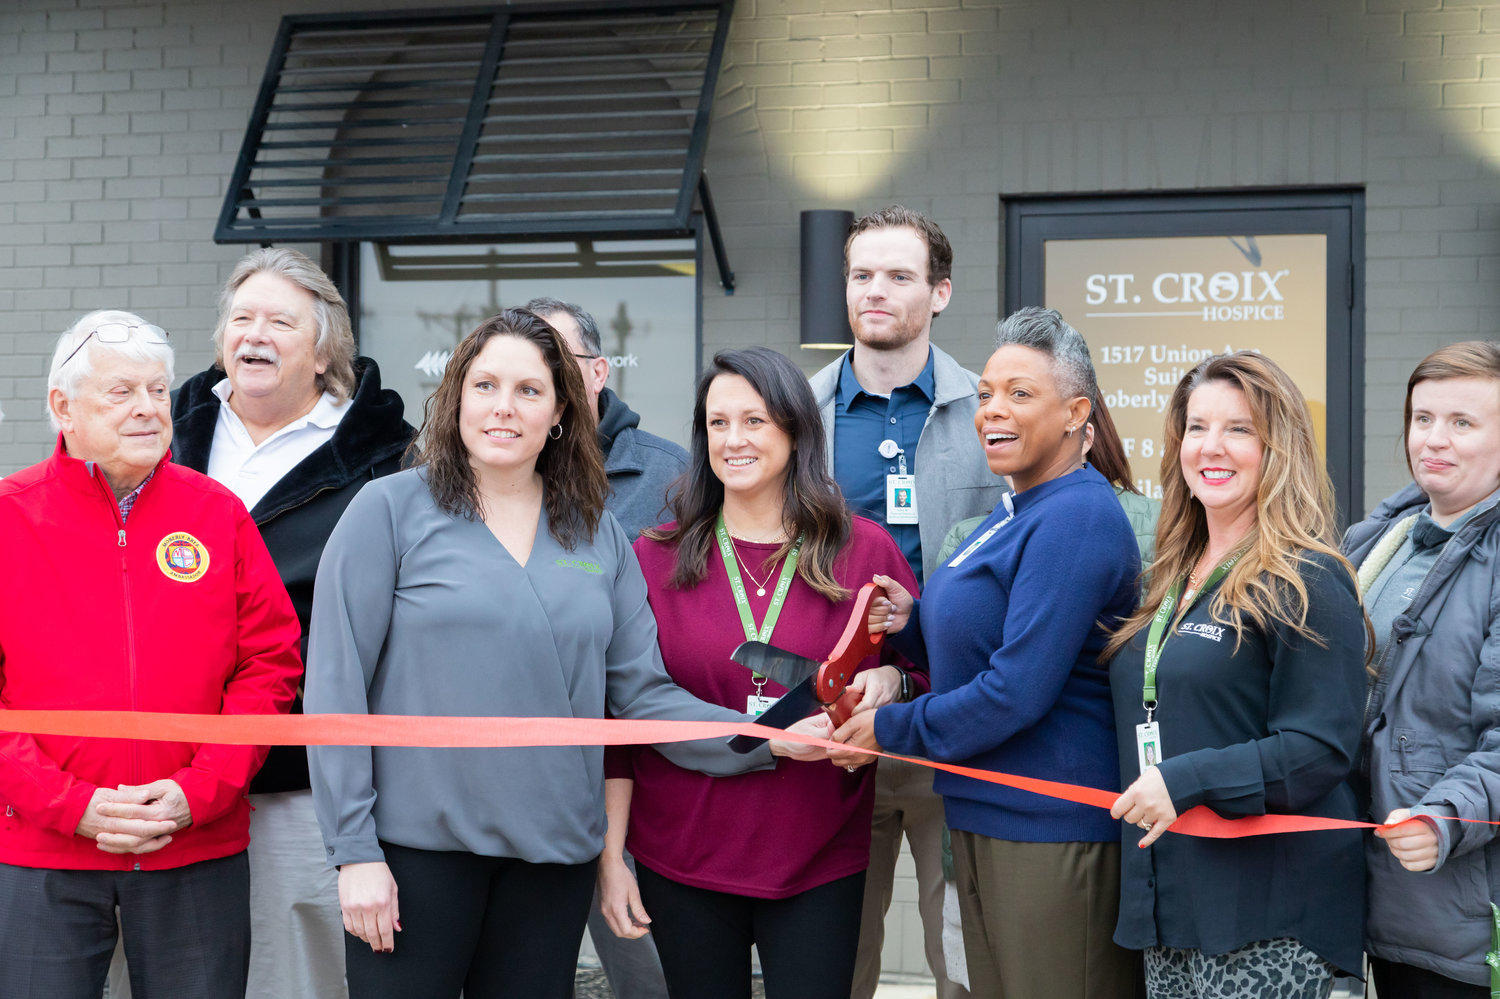 Moberly Area Chamber of Commerce Ambassadors and St. Croix Hospice Staff celebrate a new location for the hospice during a ribbon-cutting last week. Staff in the photo are Schelly Jordan, Emily Davenport, Luke Matheny, Leslie Earls, Rachel Choate and Kaitlyn Baker.